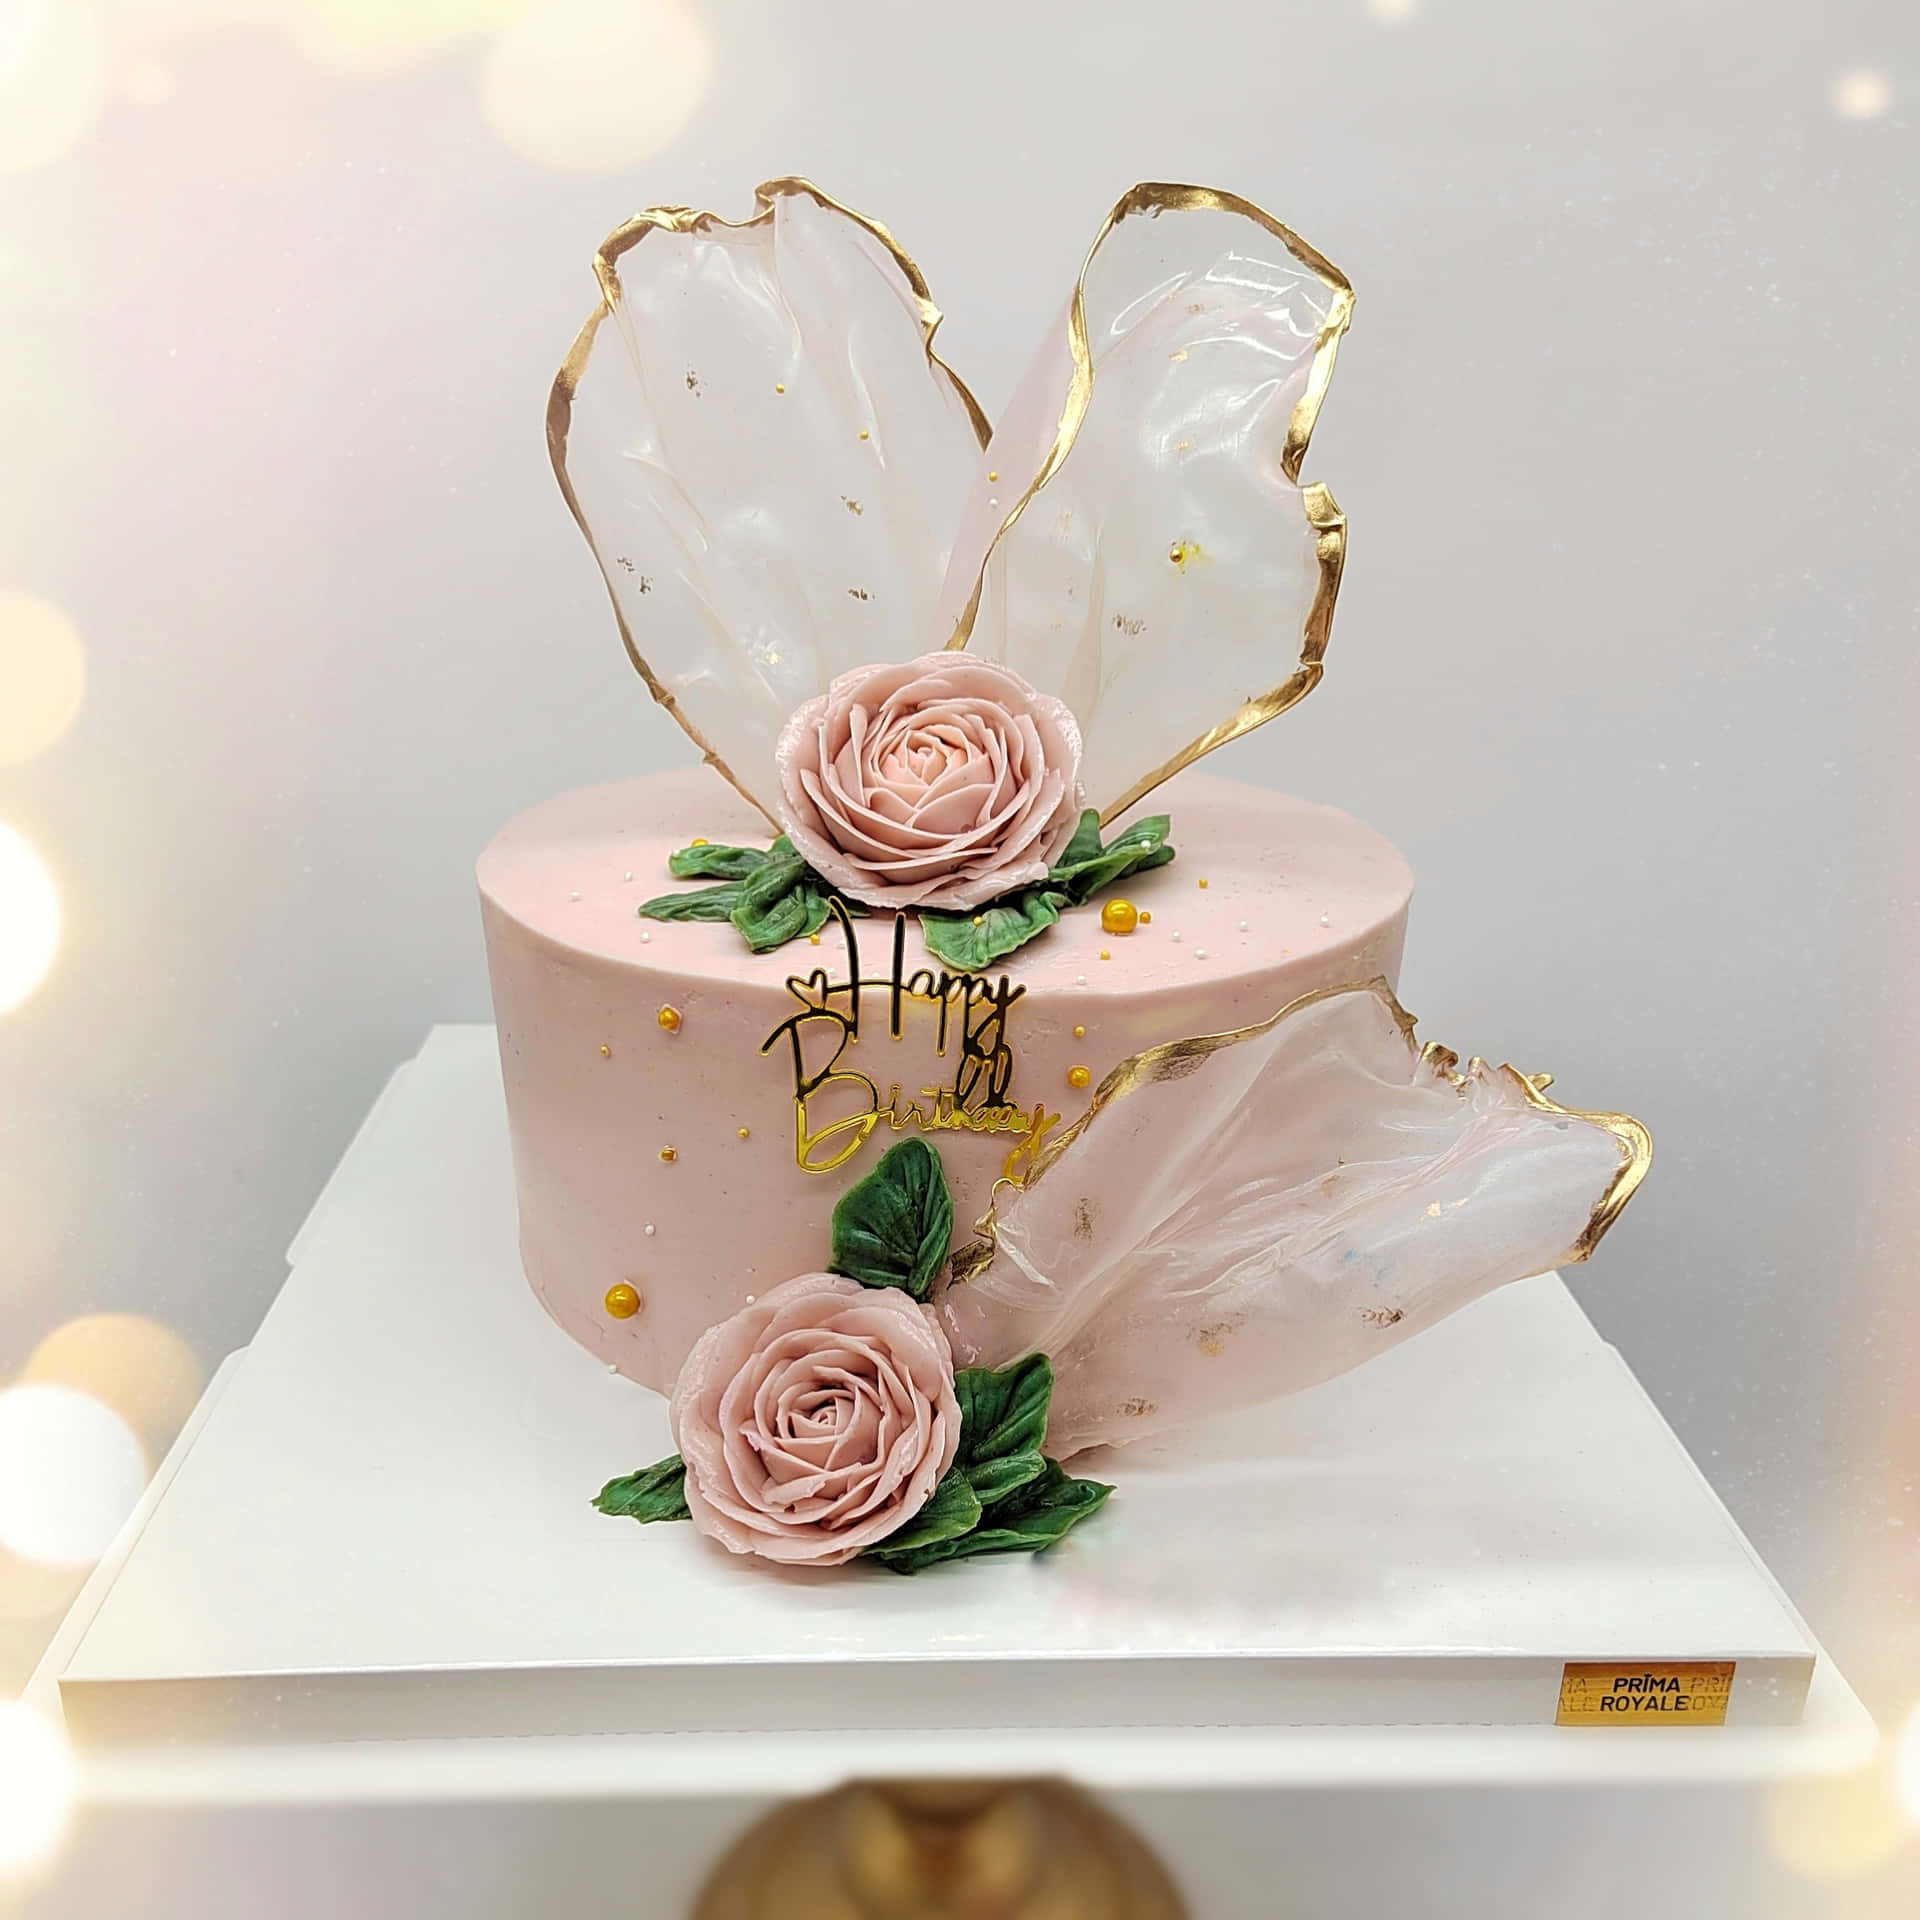 Creating Edible Floral Wedding Cakes With Cake House